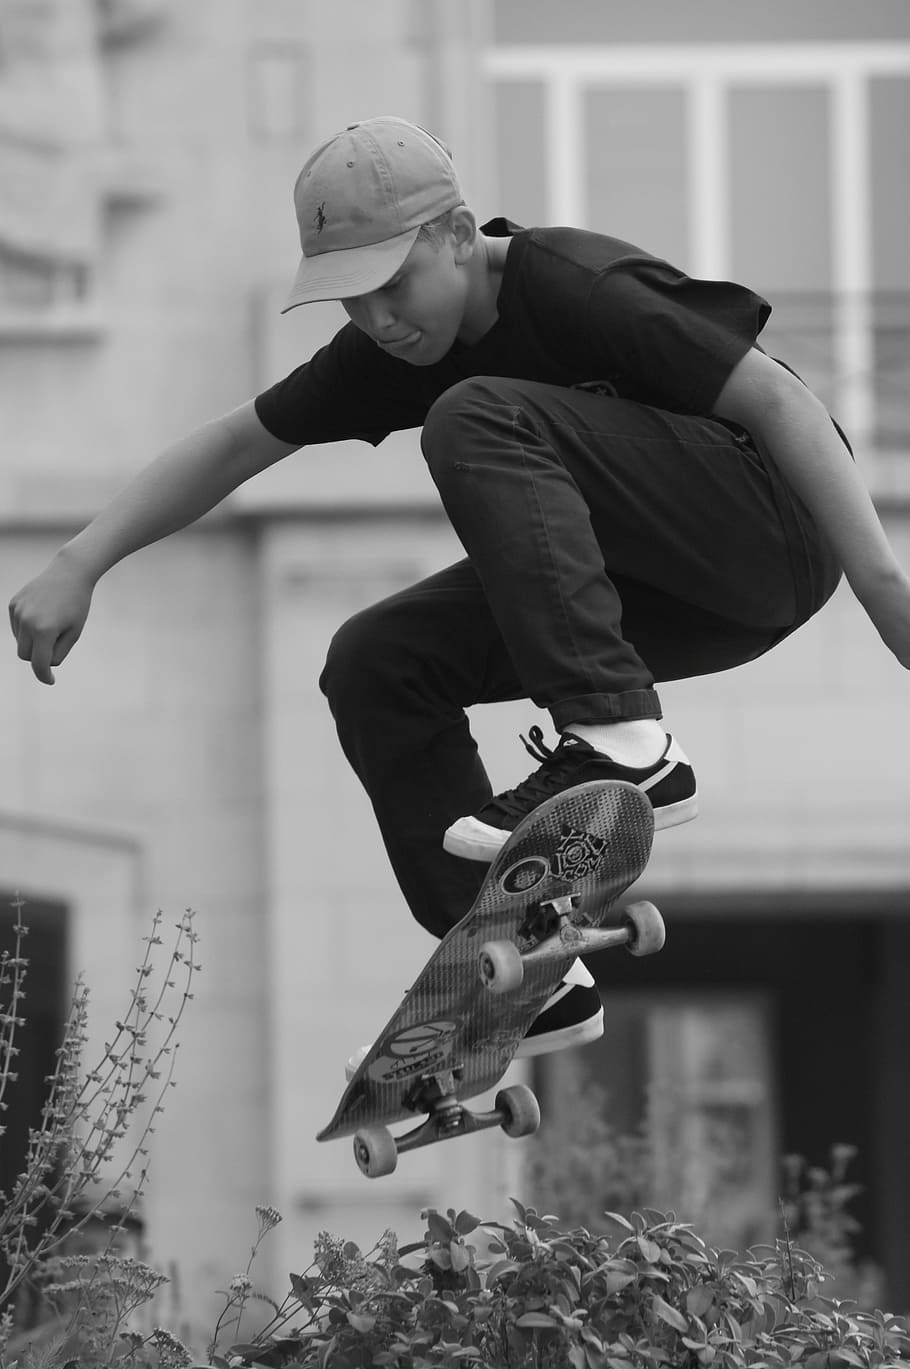 grayscale photography, man, playing, skateboard, skating, sports, people, pet, jump, skater